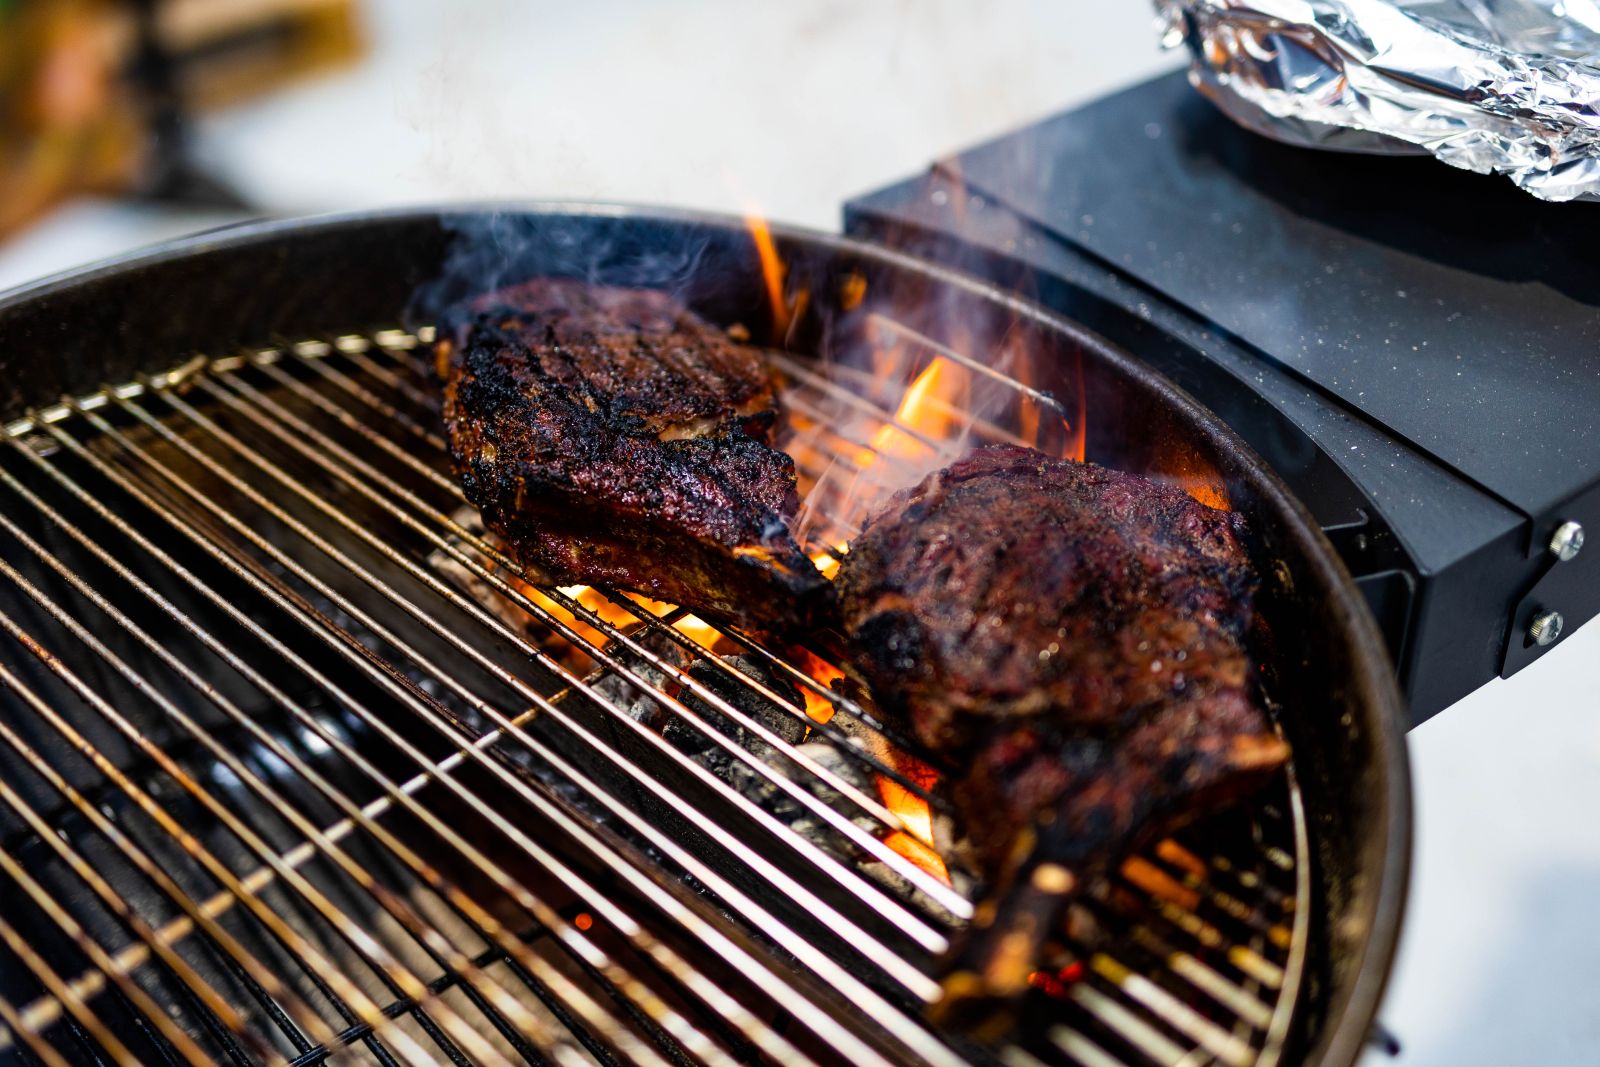 This_image_shows_steak_being-cooked_on_sns_kettle_bbq